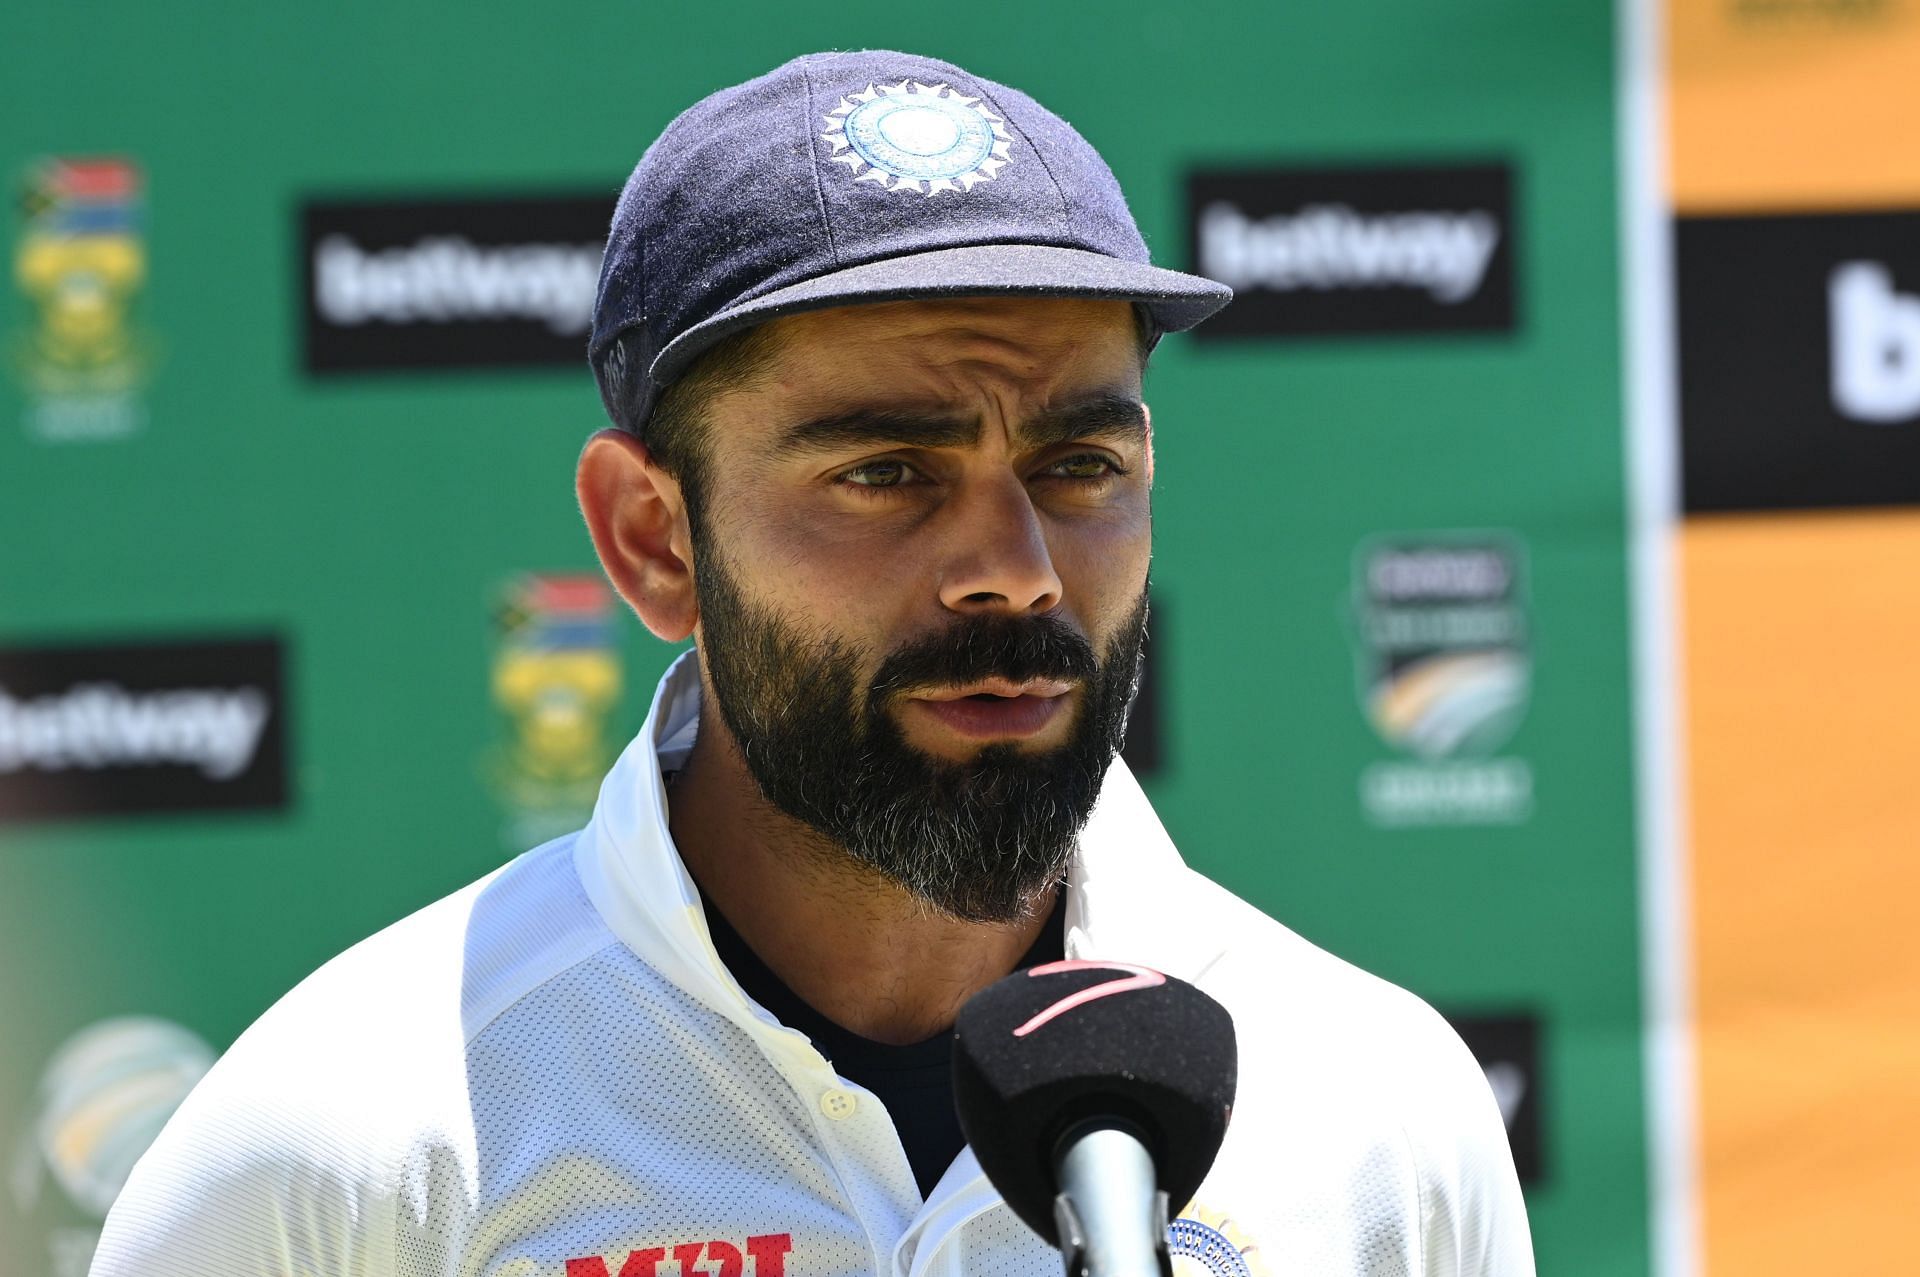 Virat Kohli might want to concentrate on winning the Test series against South Africa for now.